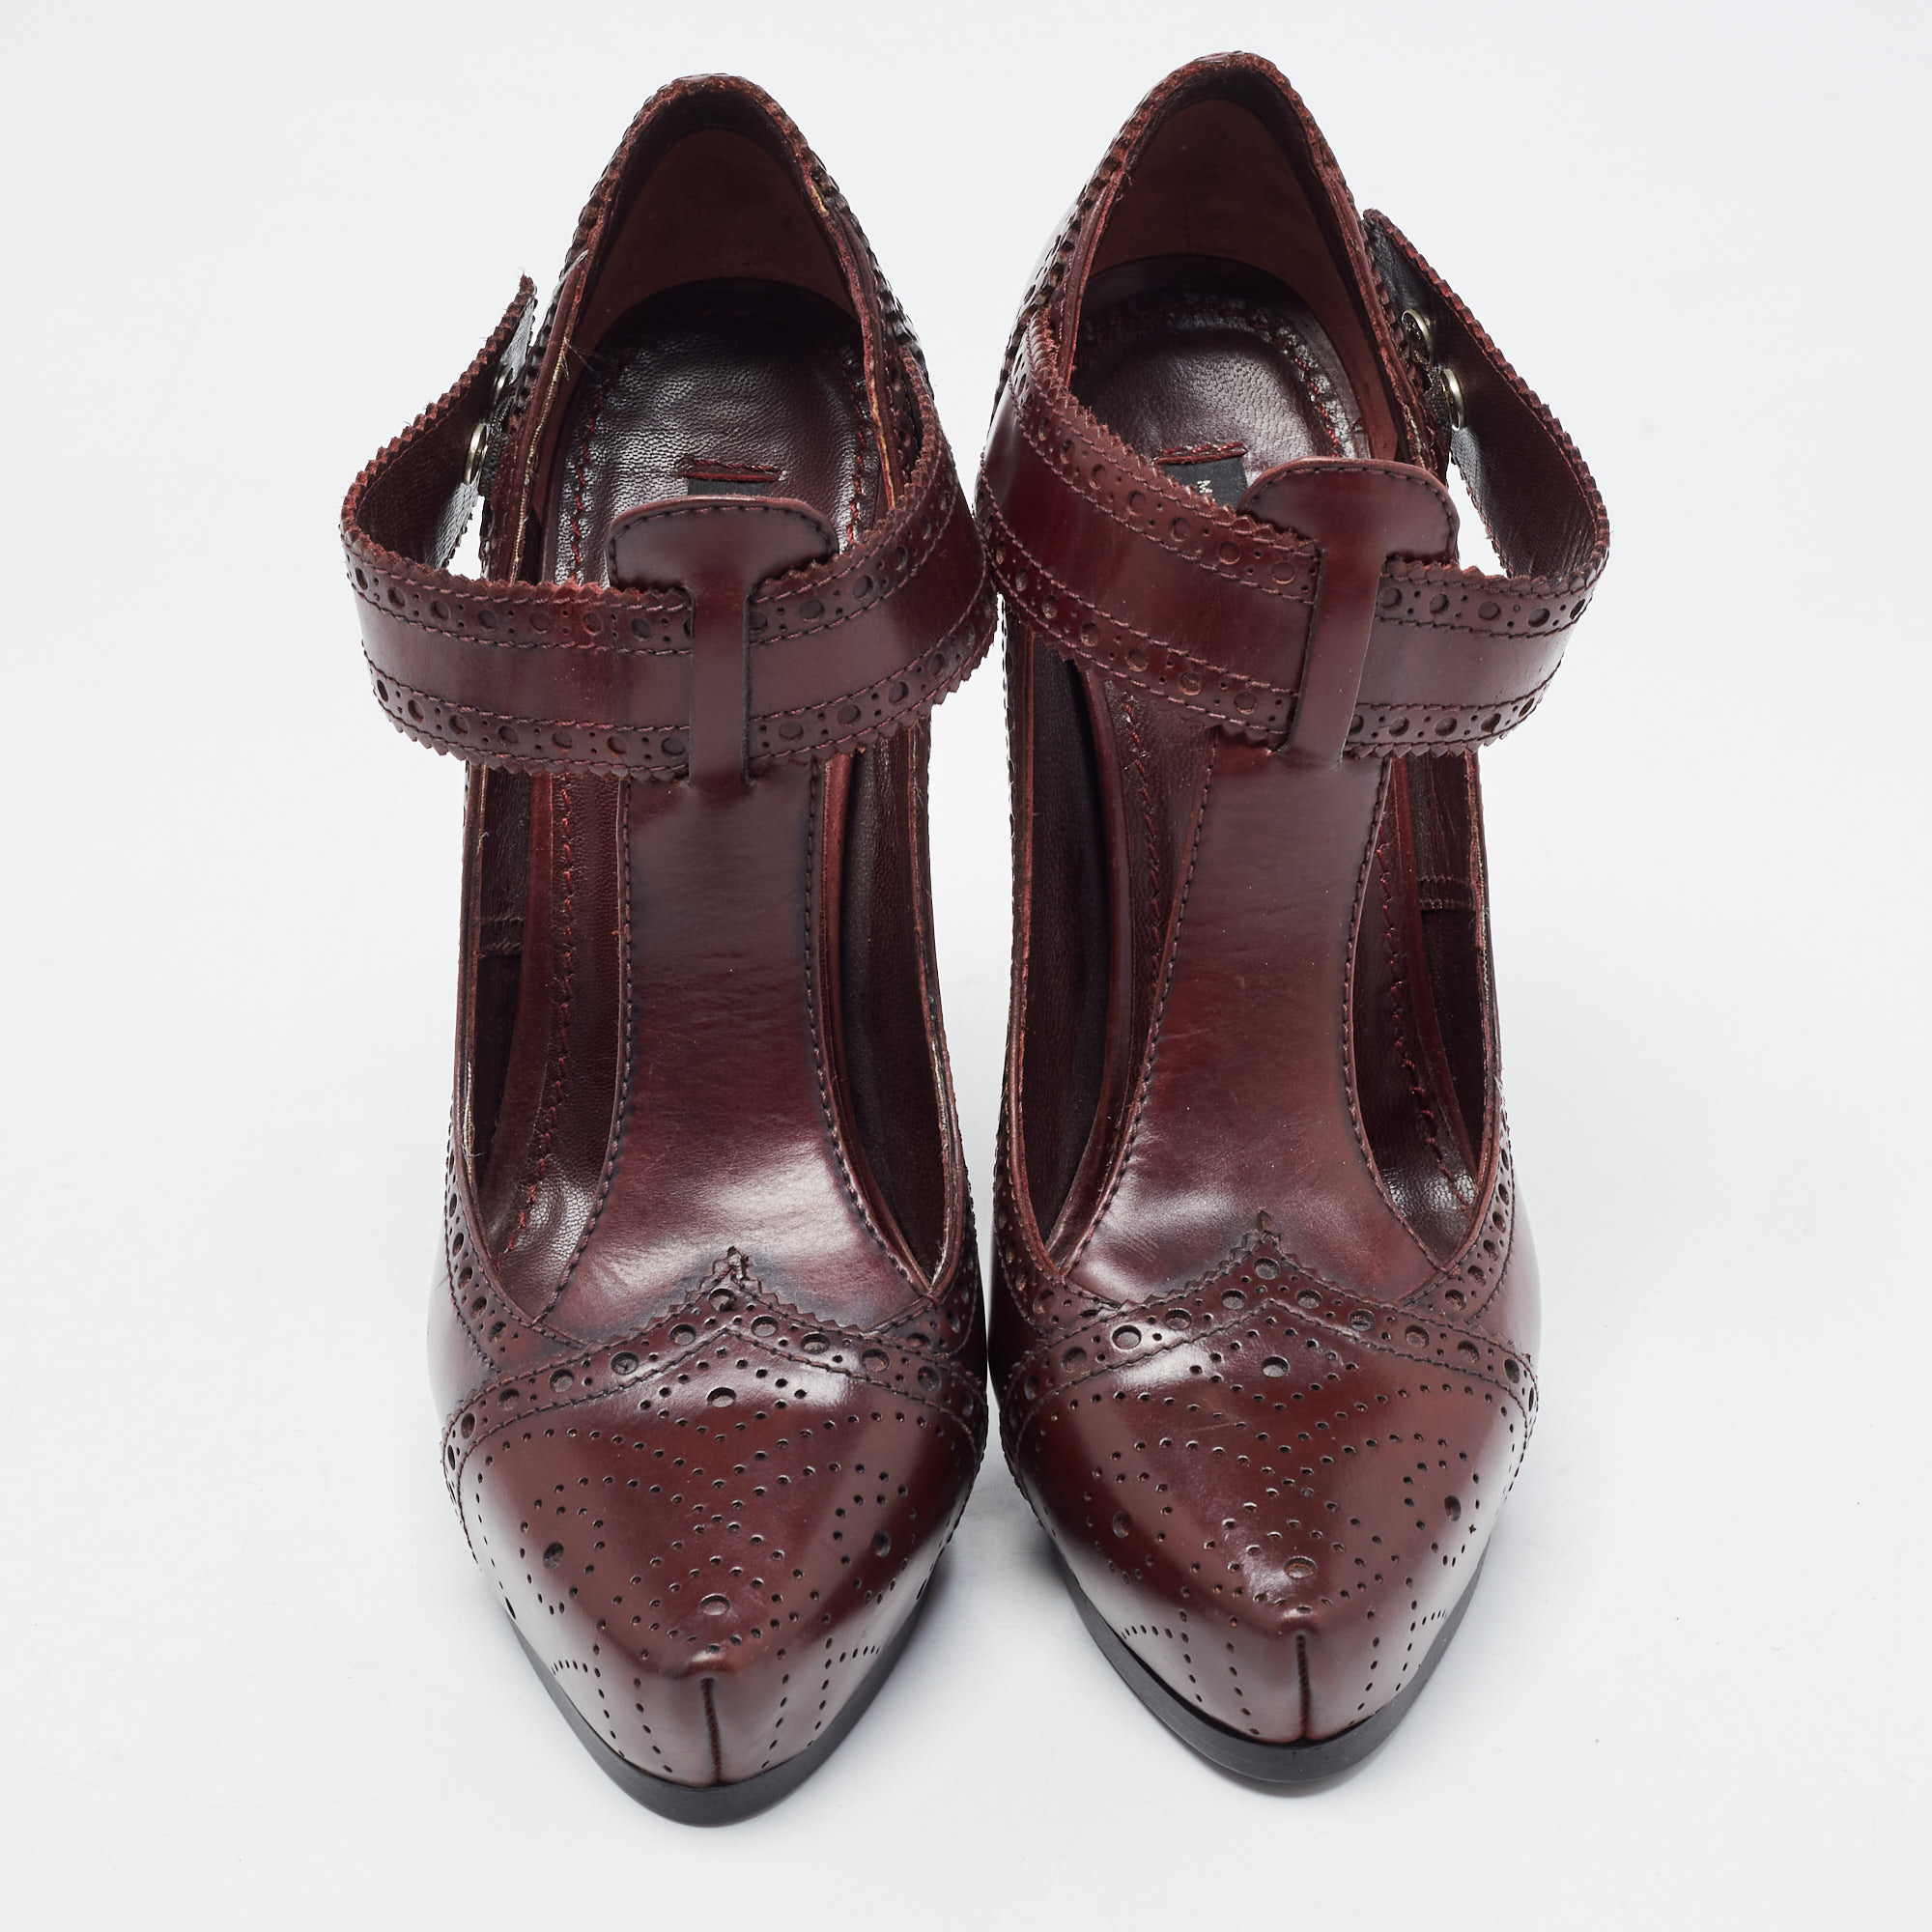 Marc Jacobs Burgundy Leather Mary Jane Pumps Size 37